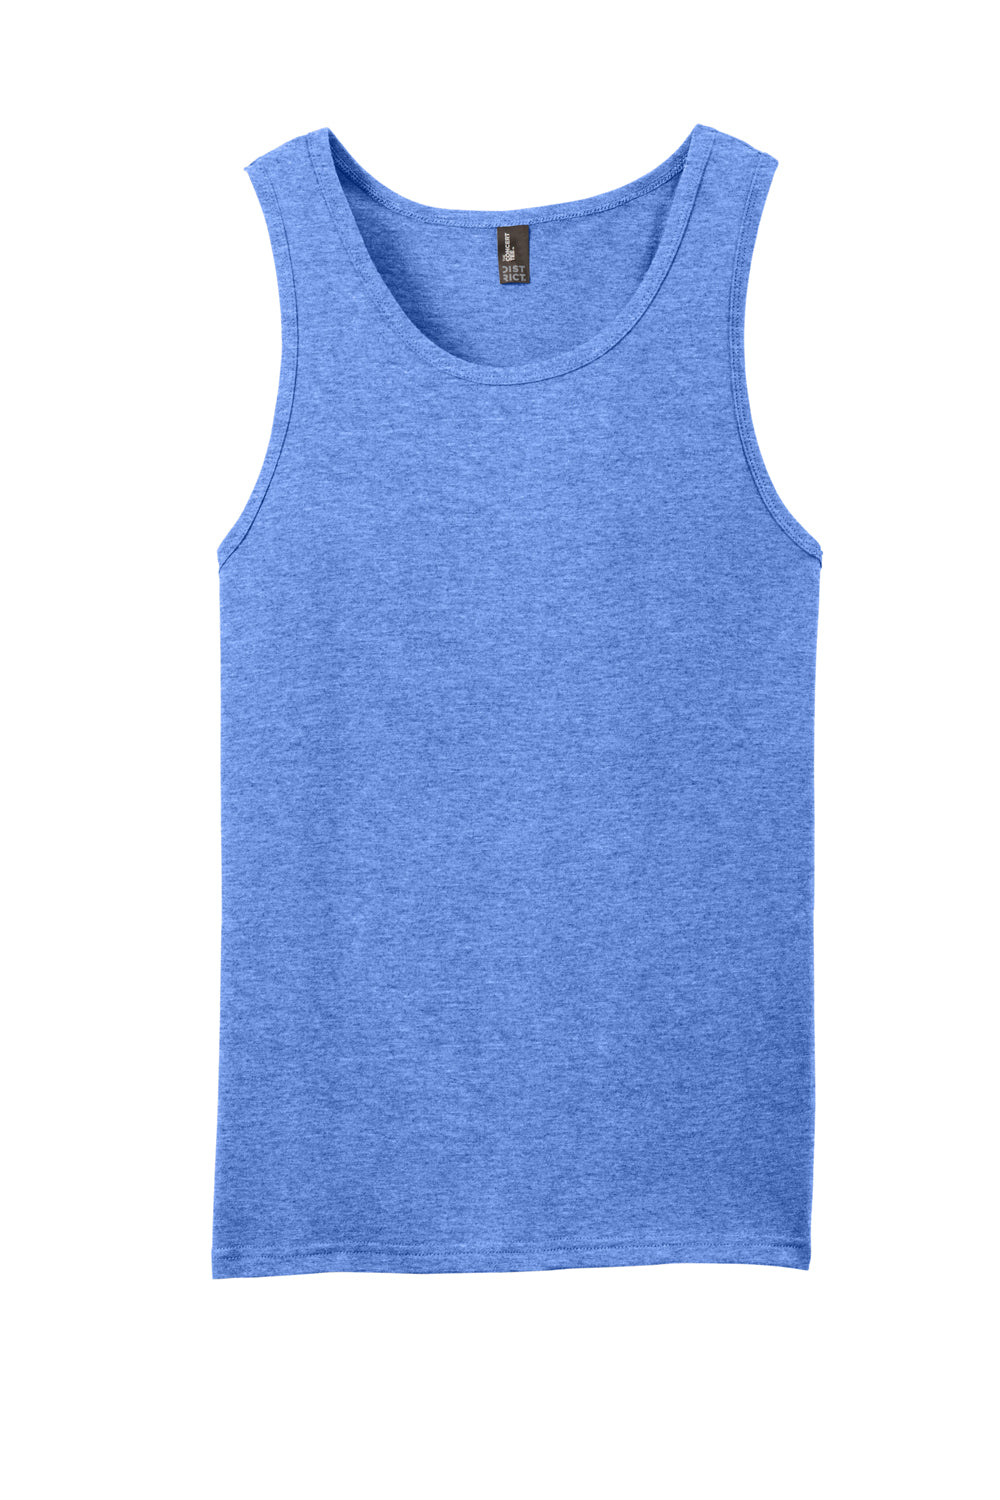 District DT5300 Mens The Concert Tank Top Heather Royal Blue Flat Front